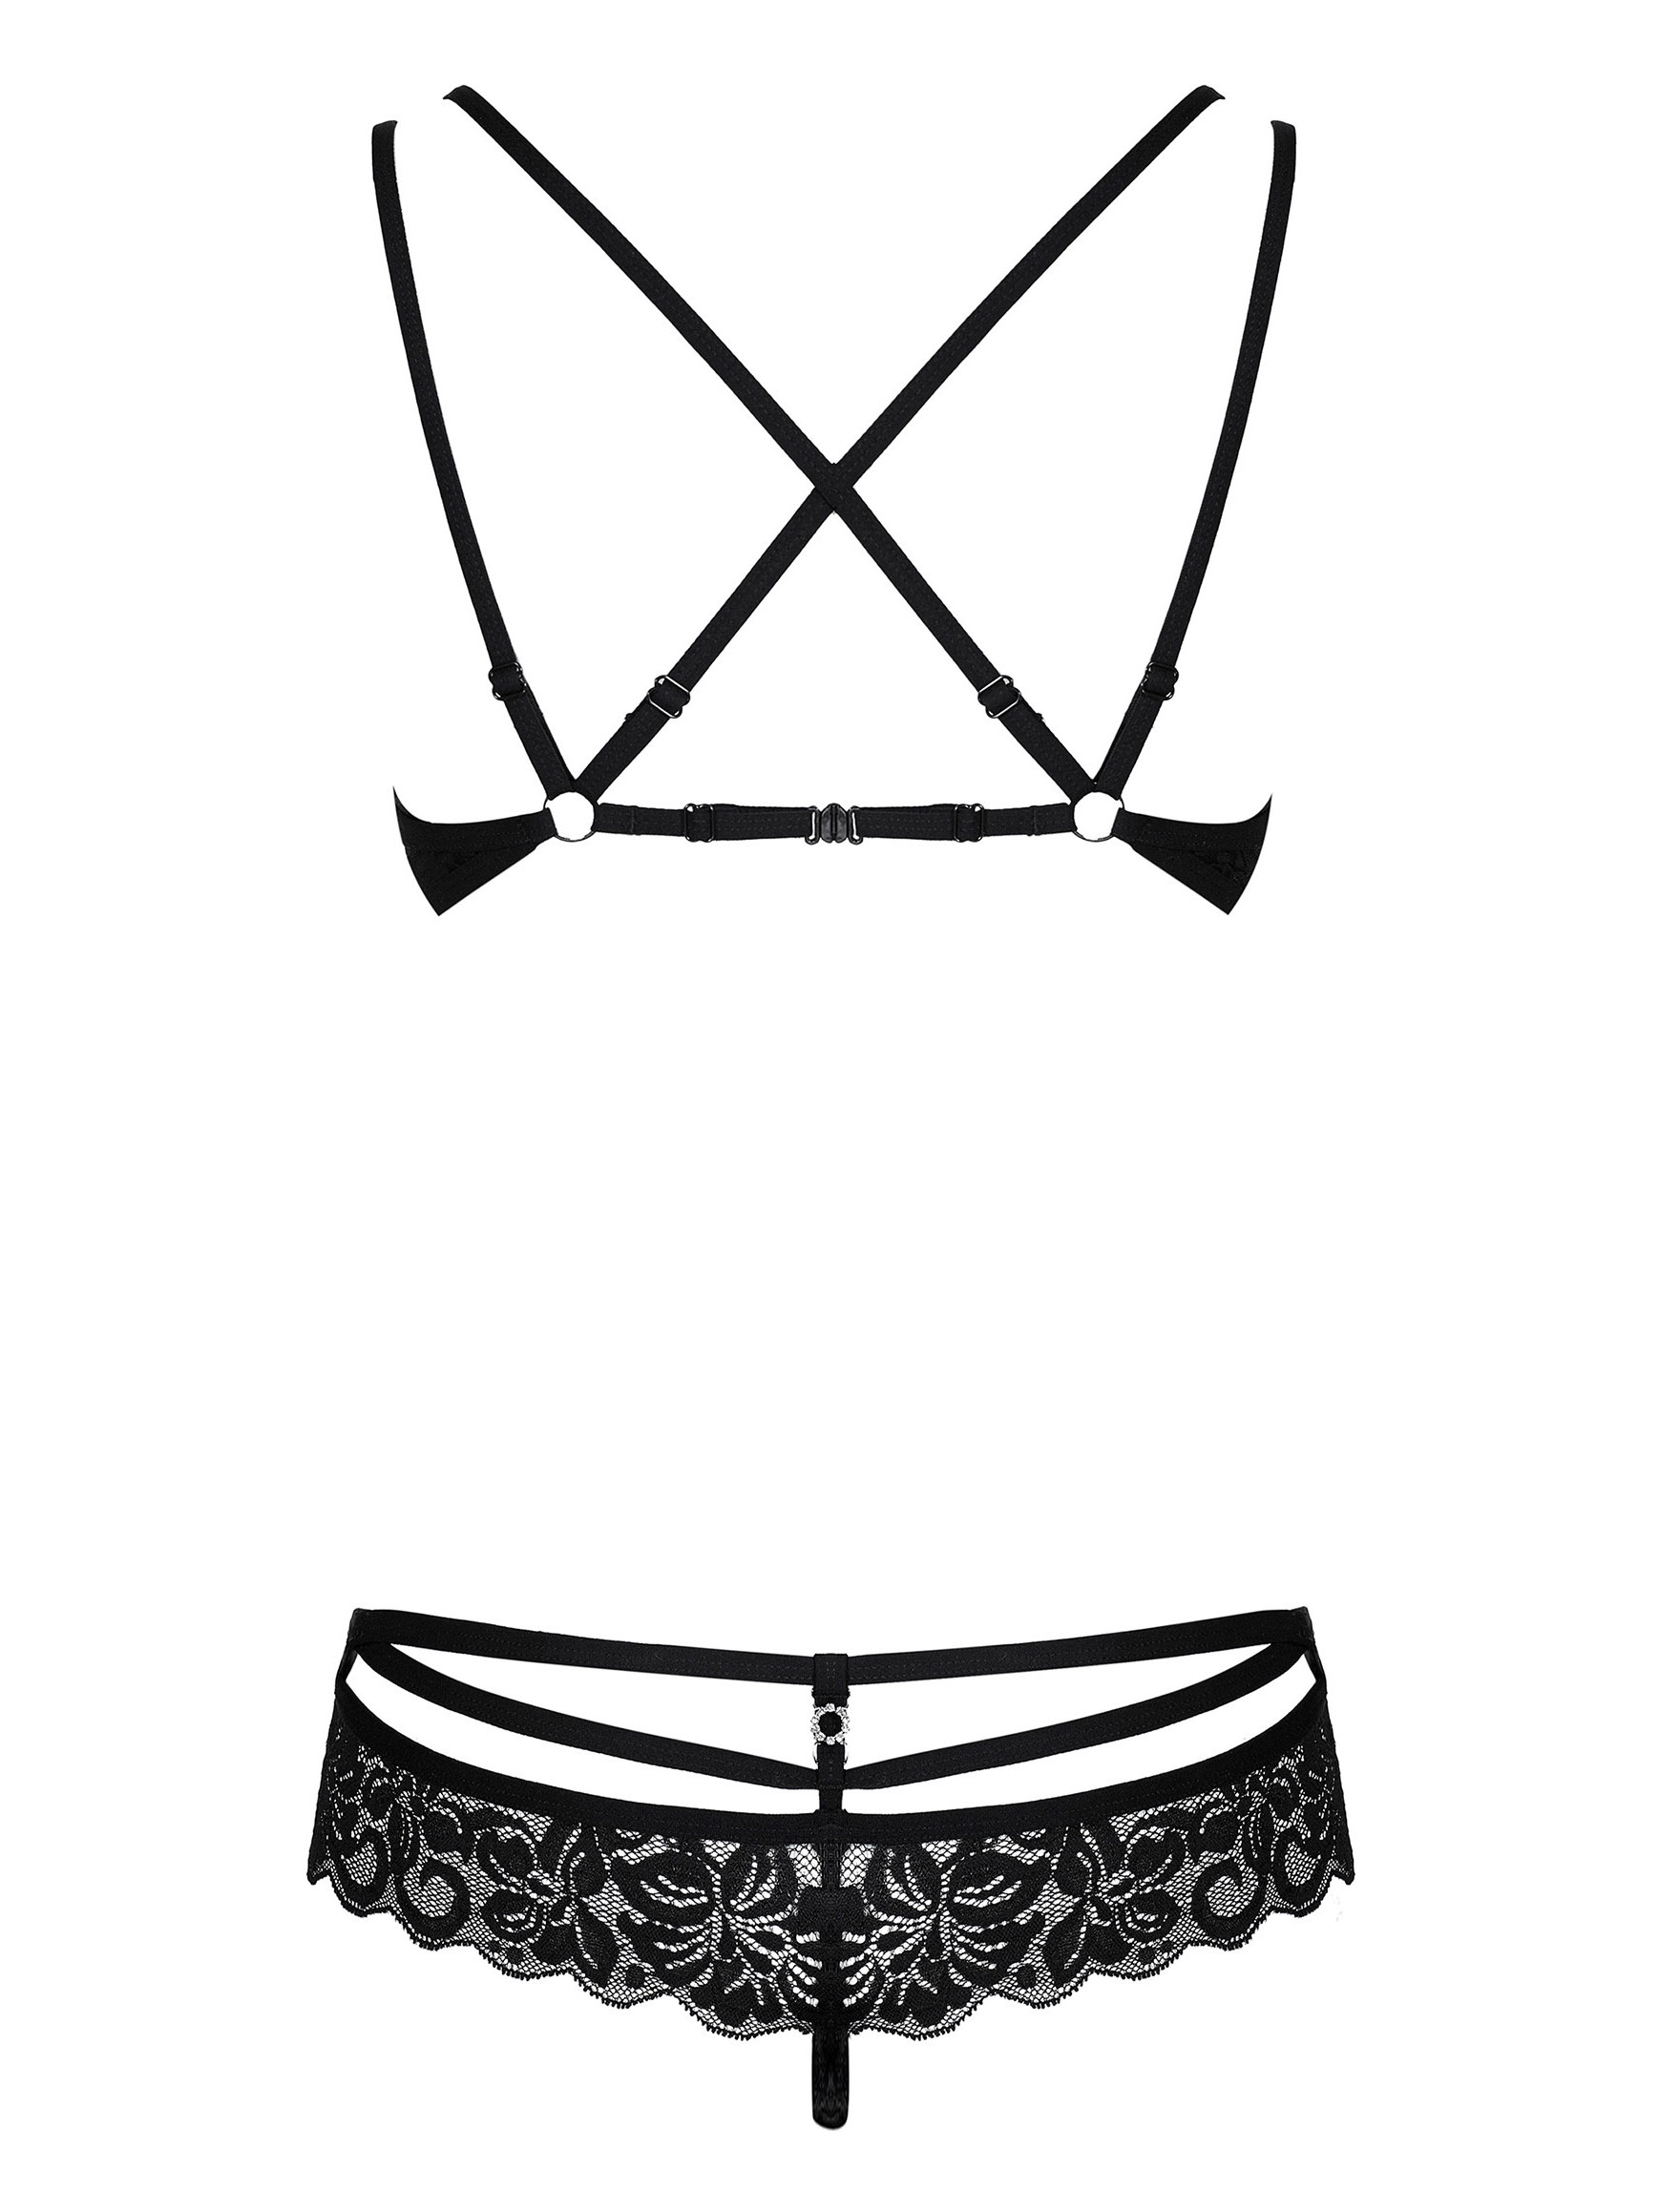 Lace lingerie set bra and thong panties Obsessive 860-SET-1 #8